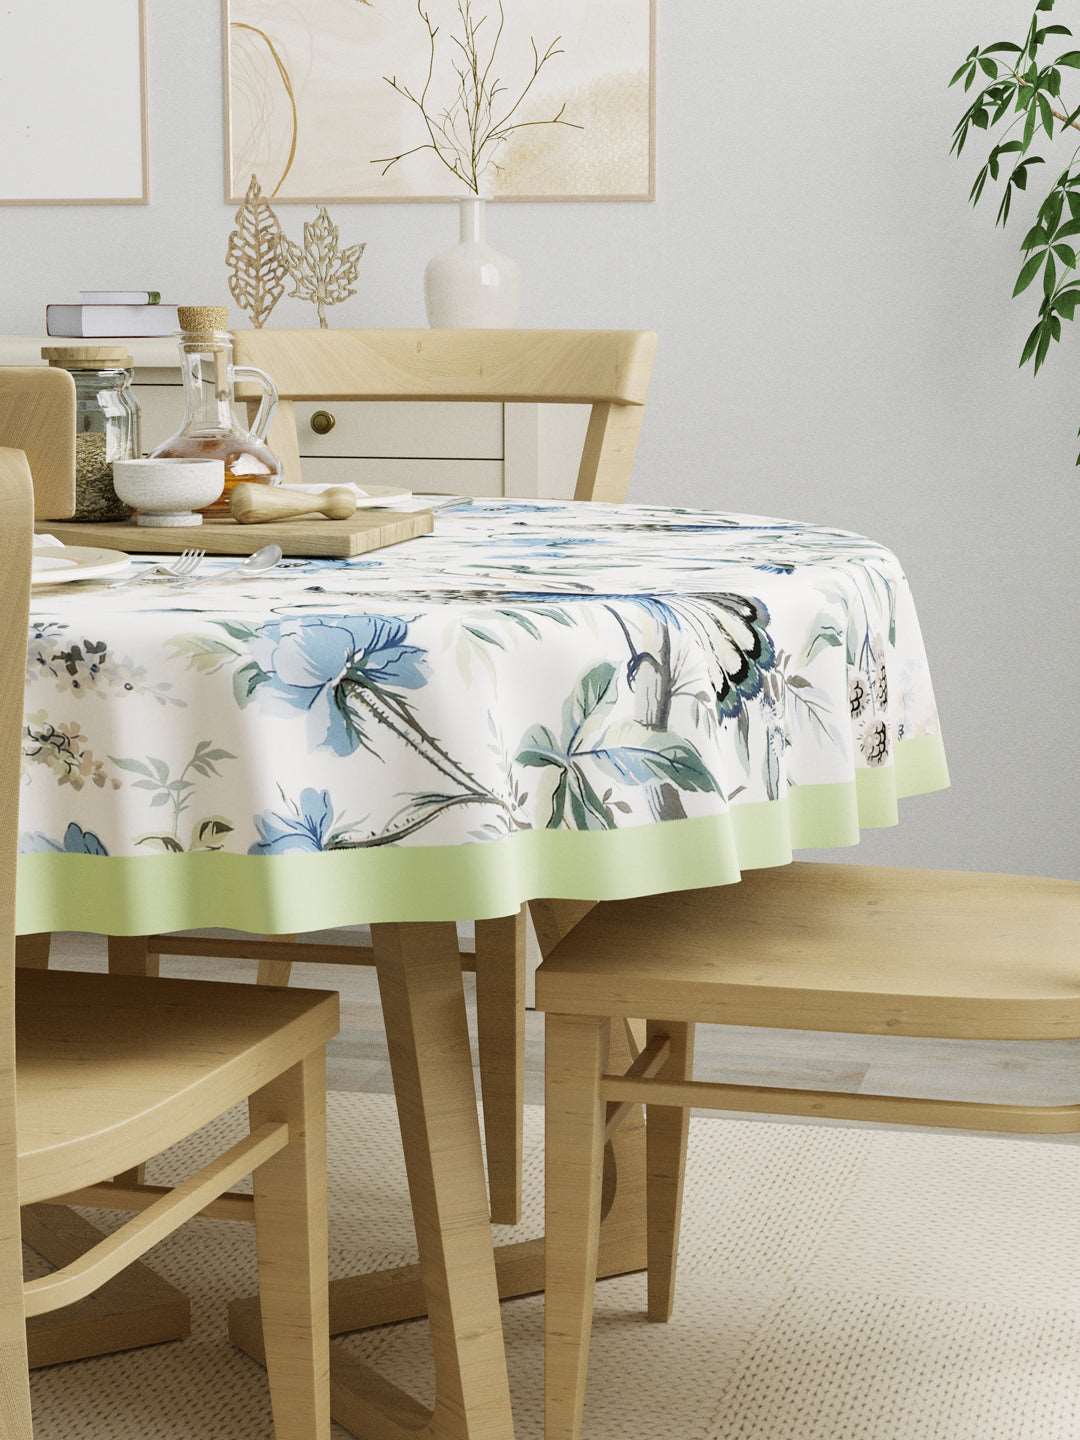 100% Cotton 4-6 Seater Round Table Cover; 60x60 Inches; Blue & Green